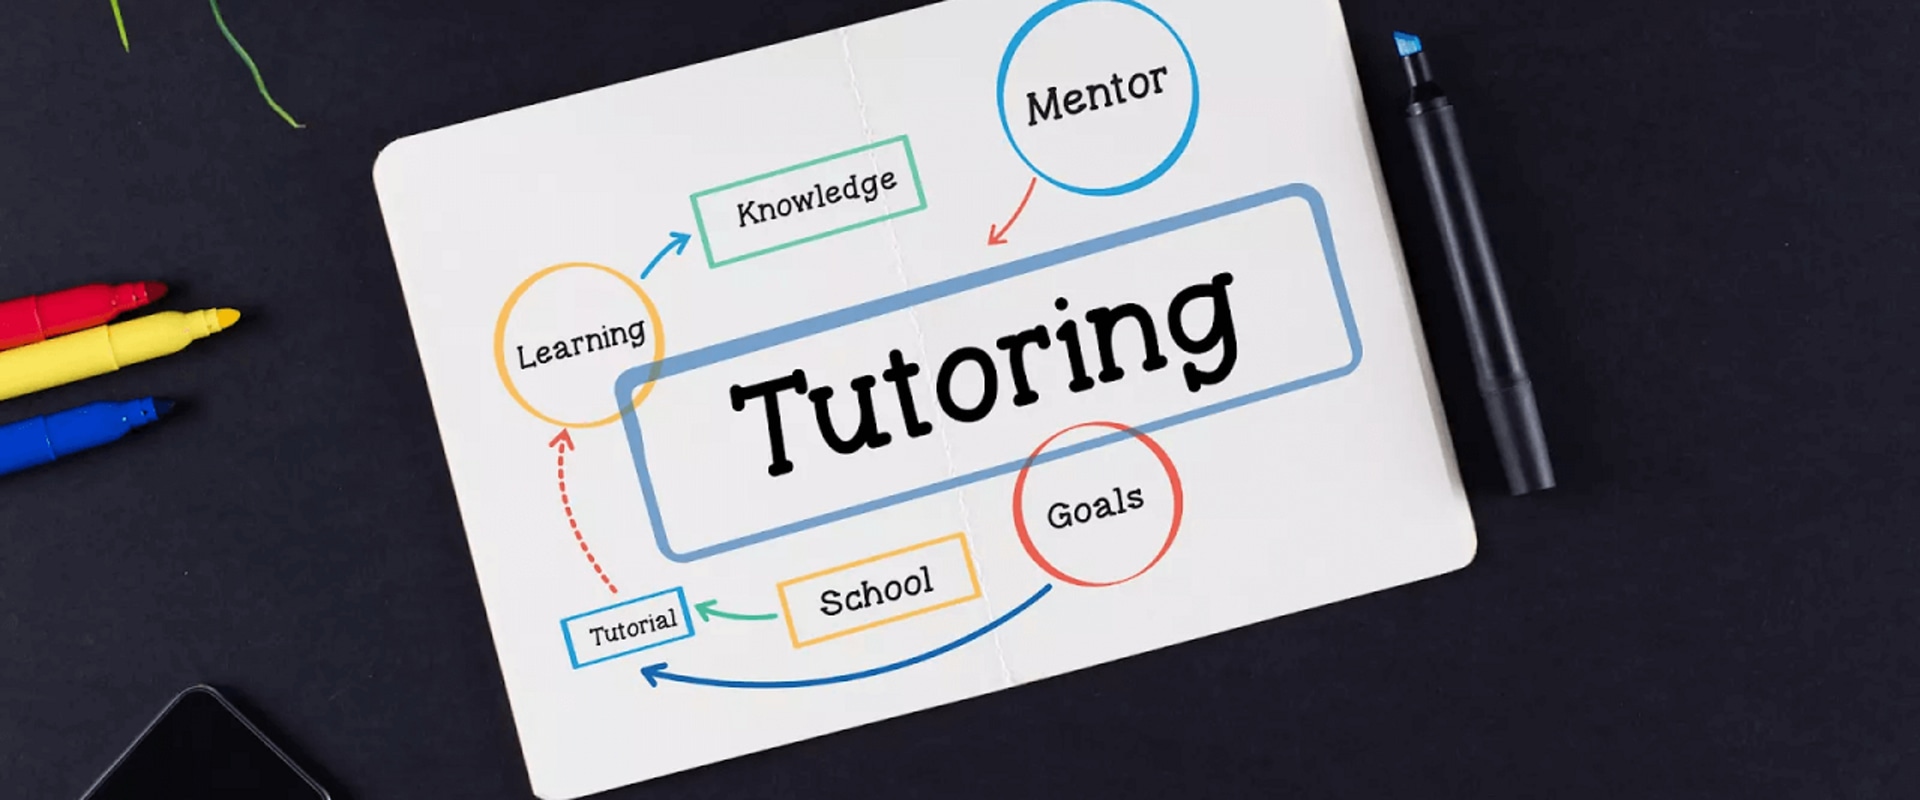 Learn More About Starting A Tutoring Business